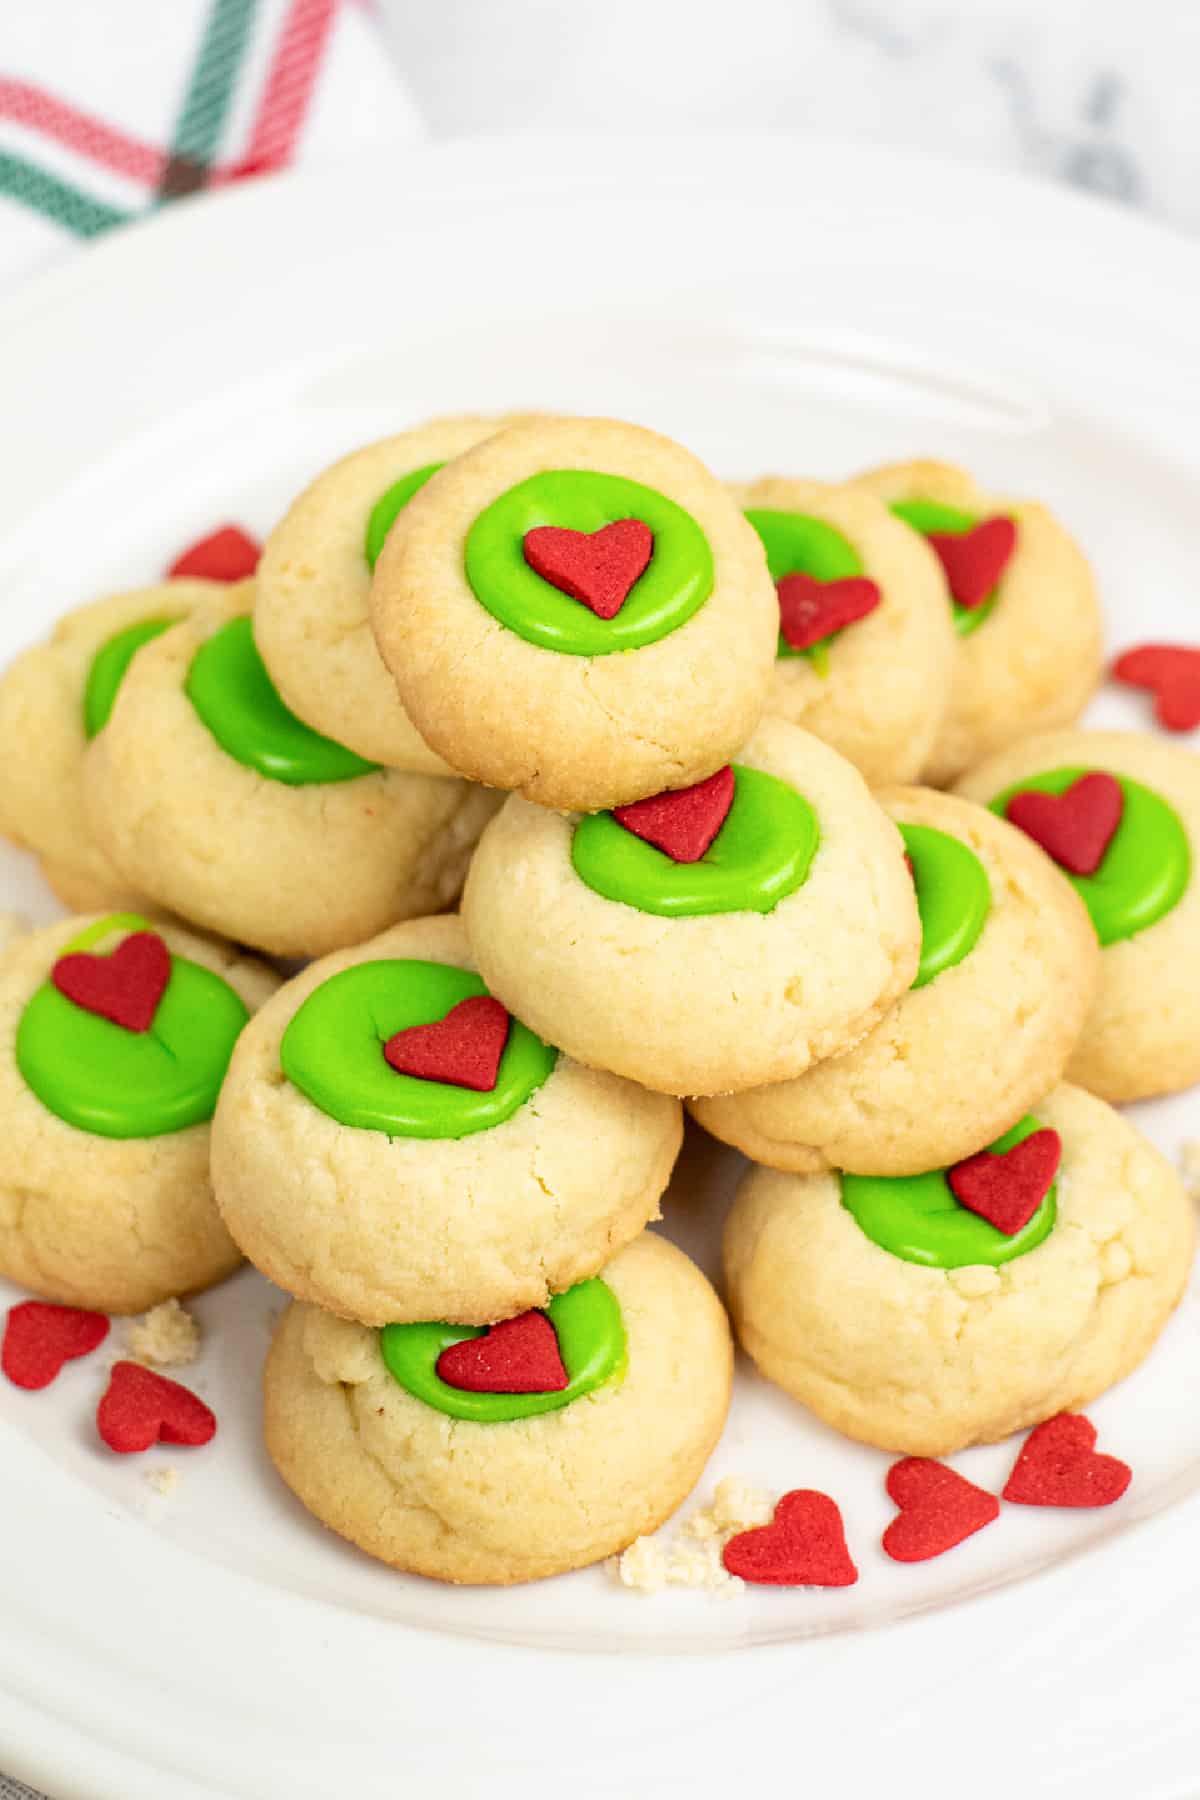 Grinch thumbprint cookies piled high on a platter with red sprinkles in the middle of each green thumbprint center from the side on a counter.